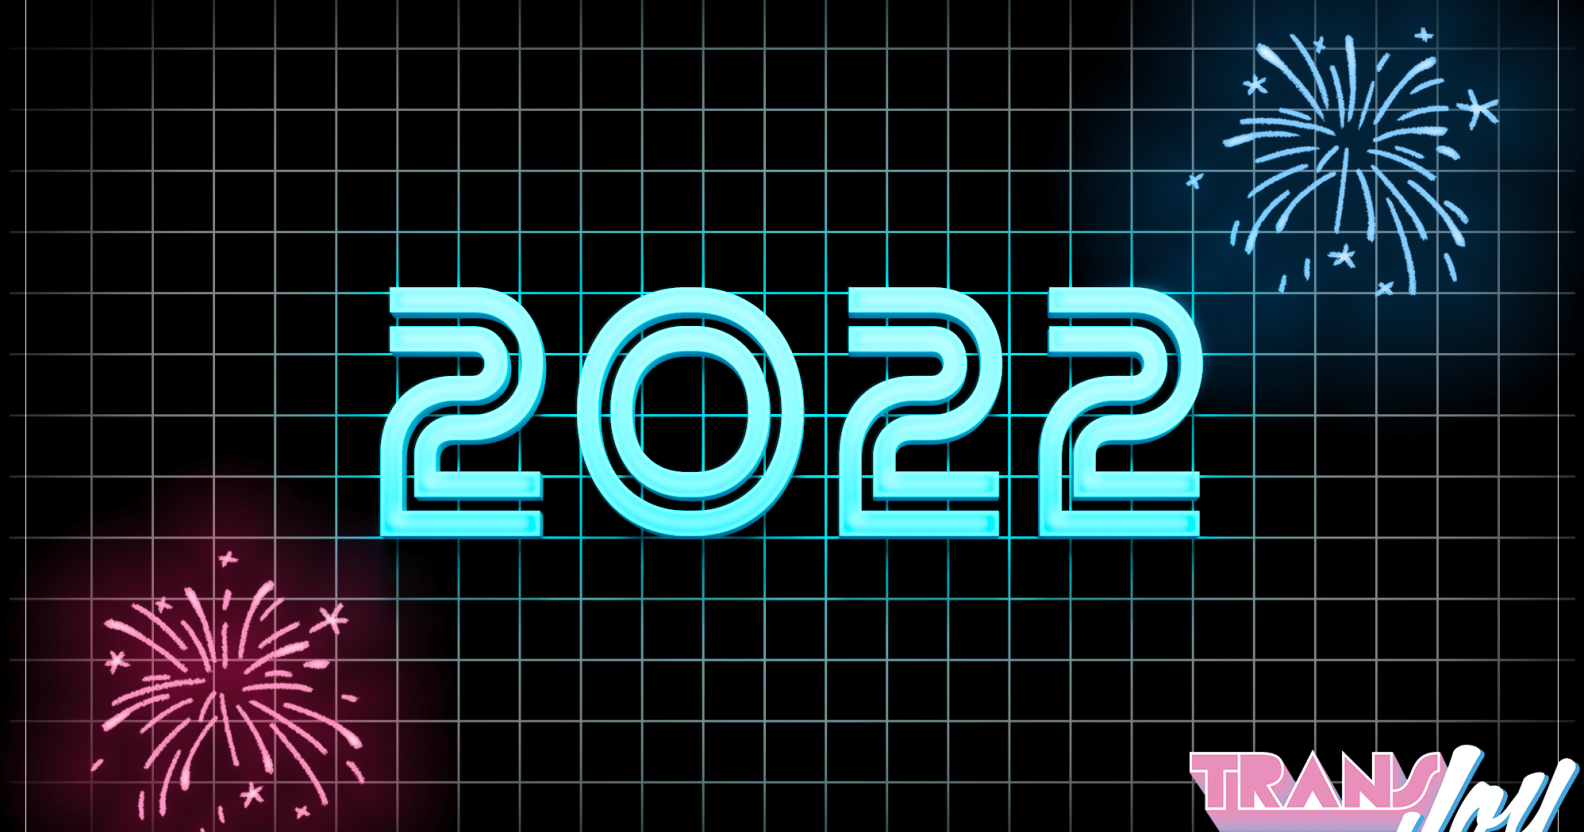 The numbers 2022 and the words Trans Joy